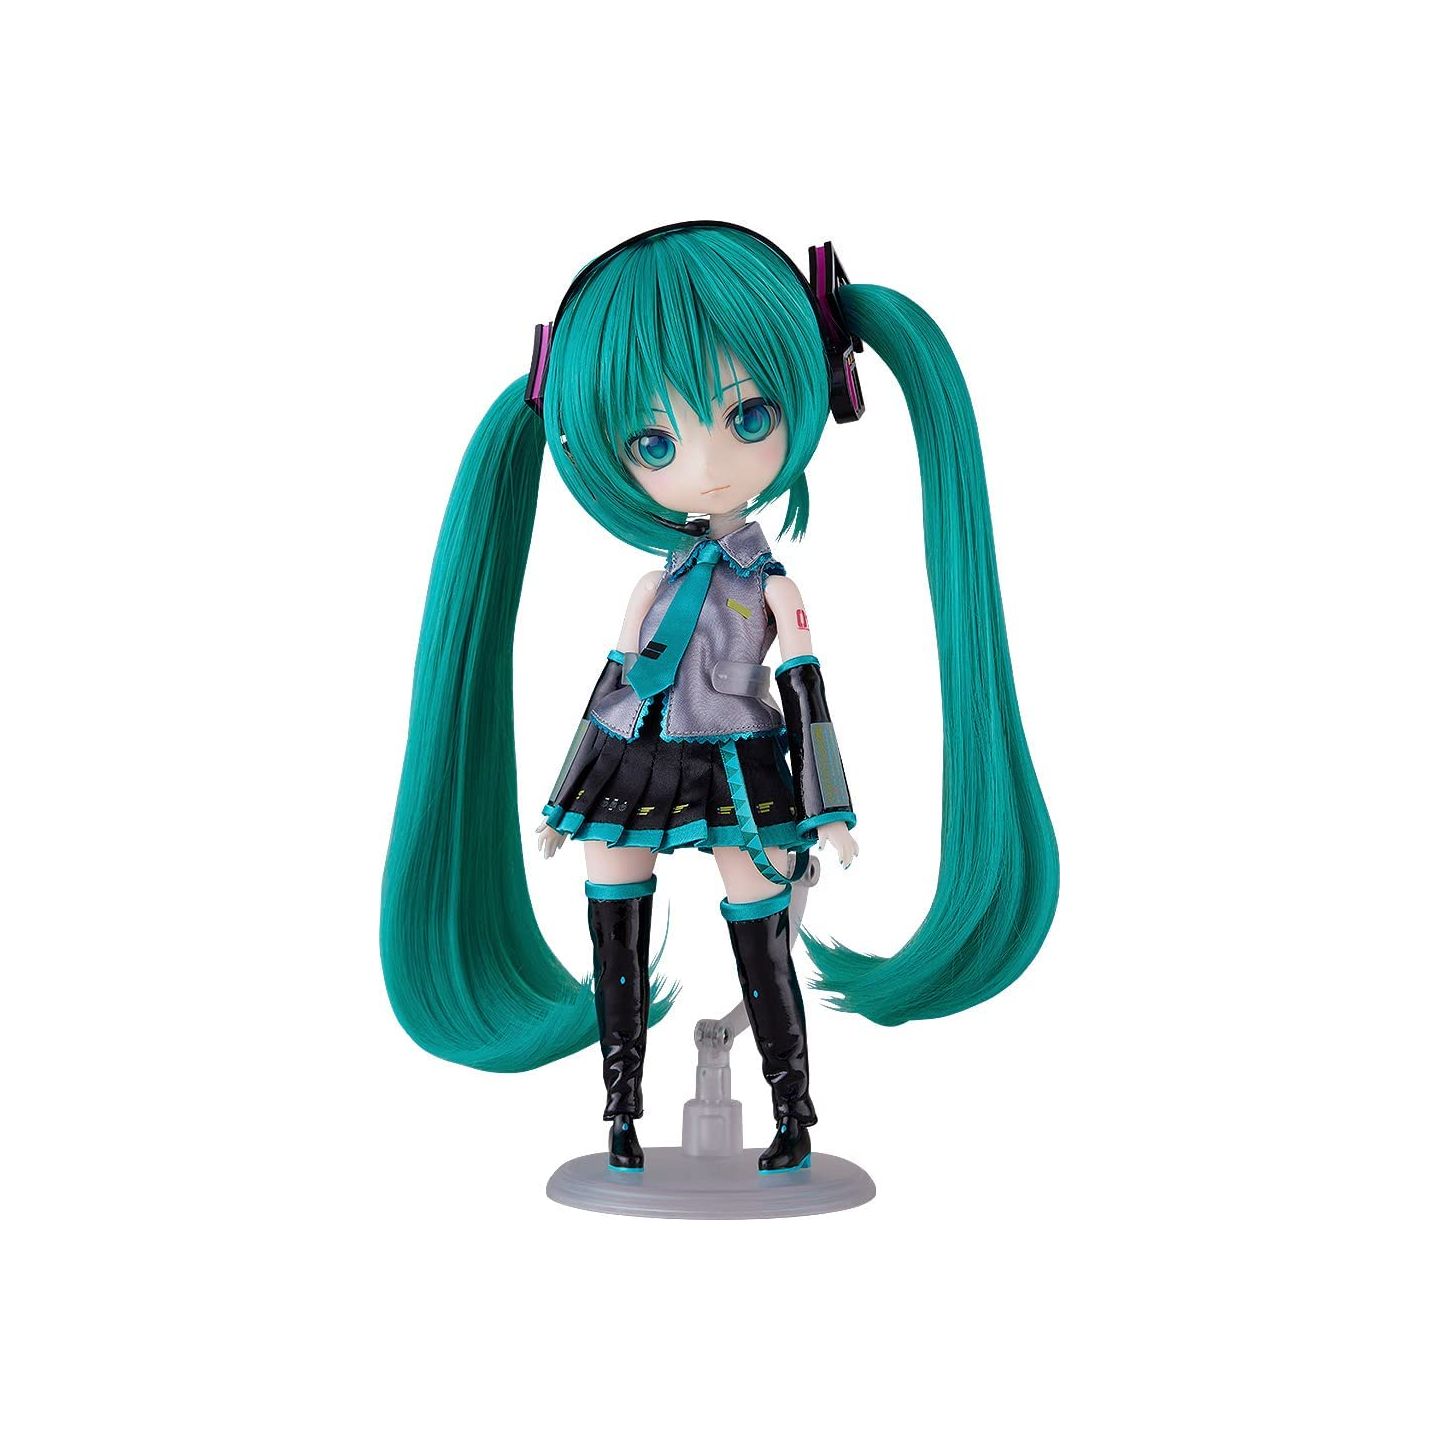 FROM JAPAN Hatsune Miku Character Vocal Series 01 Figure Good Smile Company 